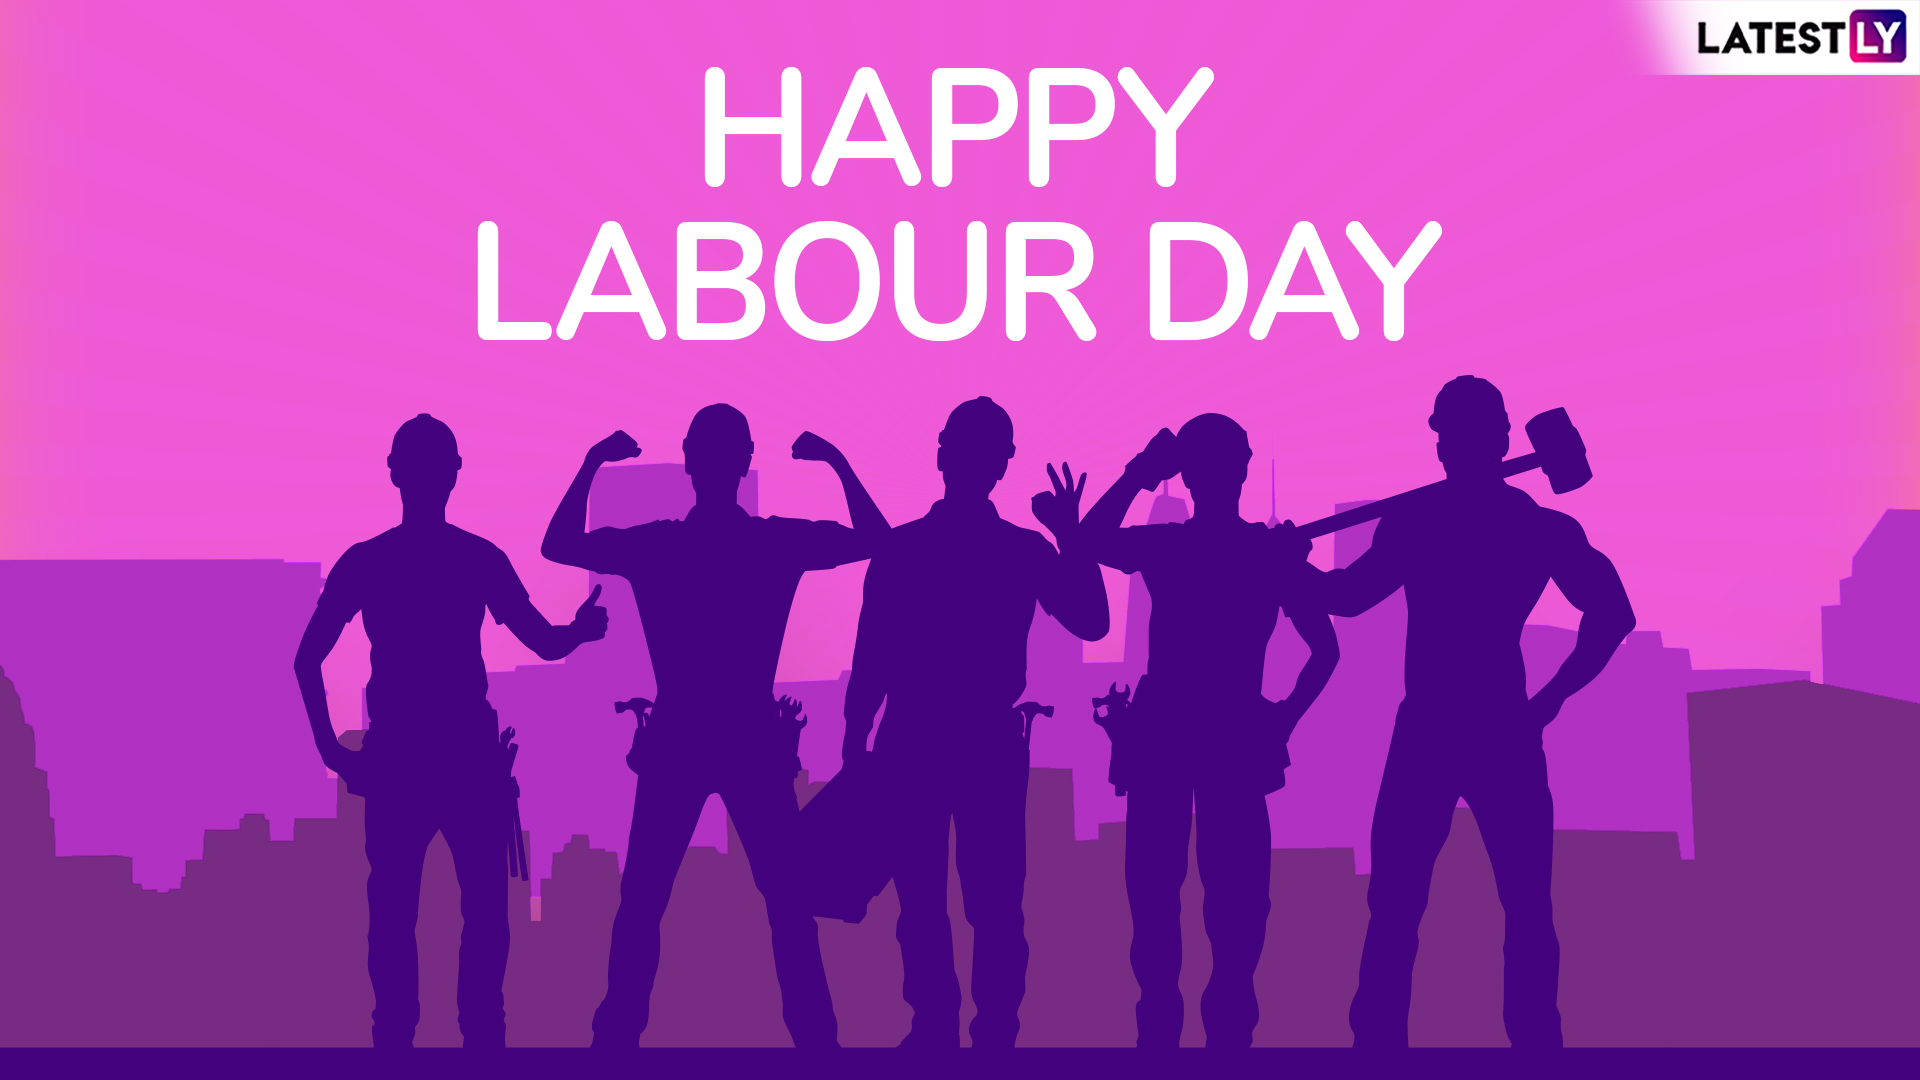 Labour Day Images With Quotes And Hd Wallpapers For Free Download Online Wish Happy Labor Day